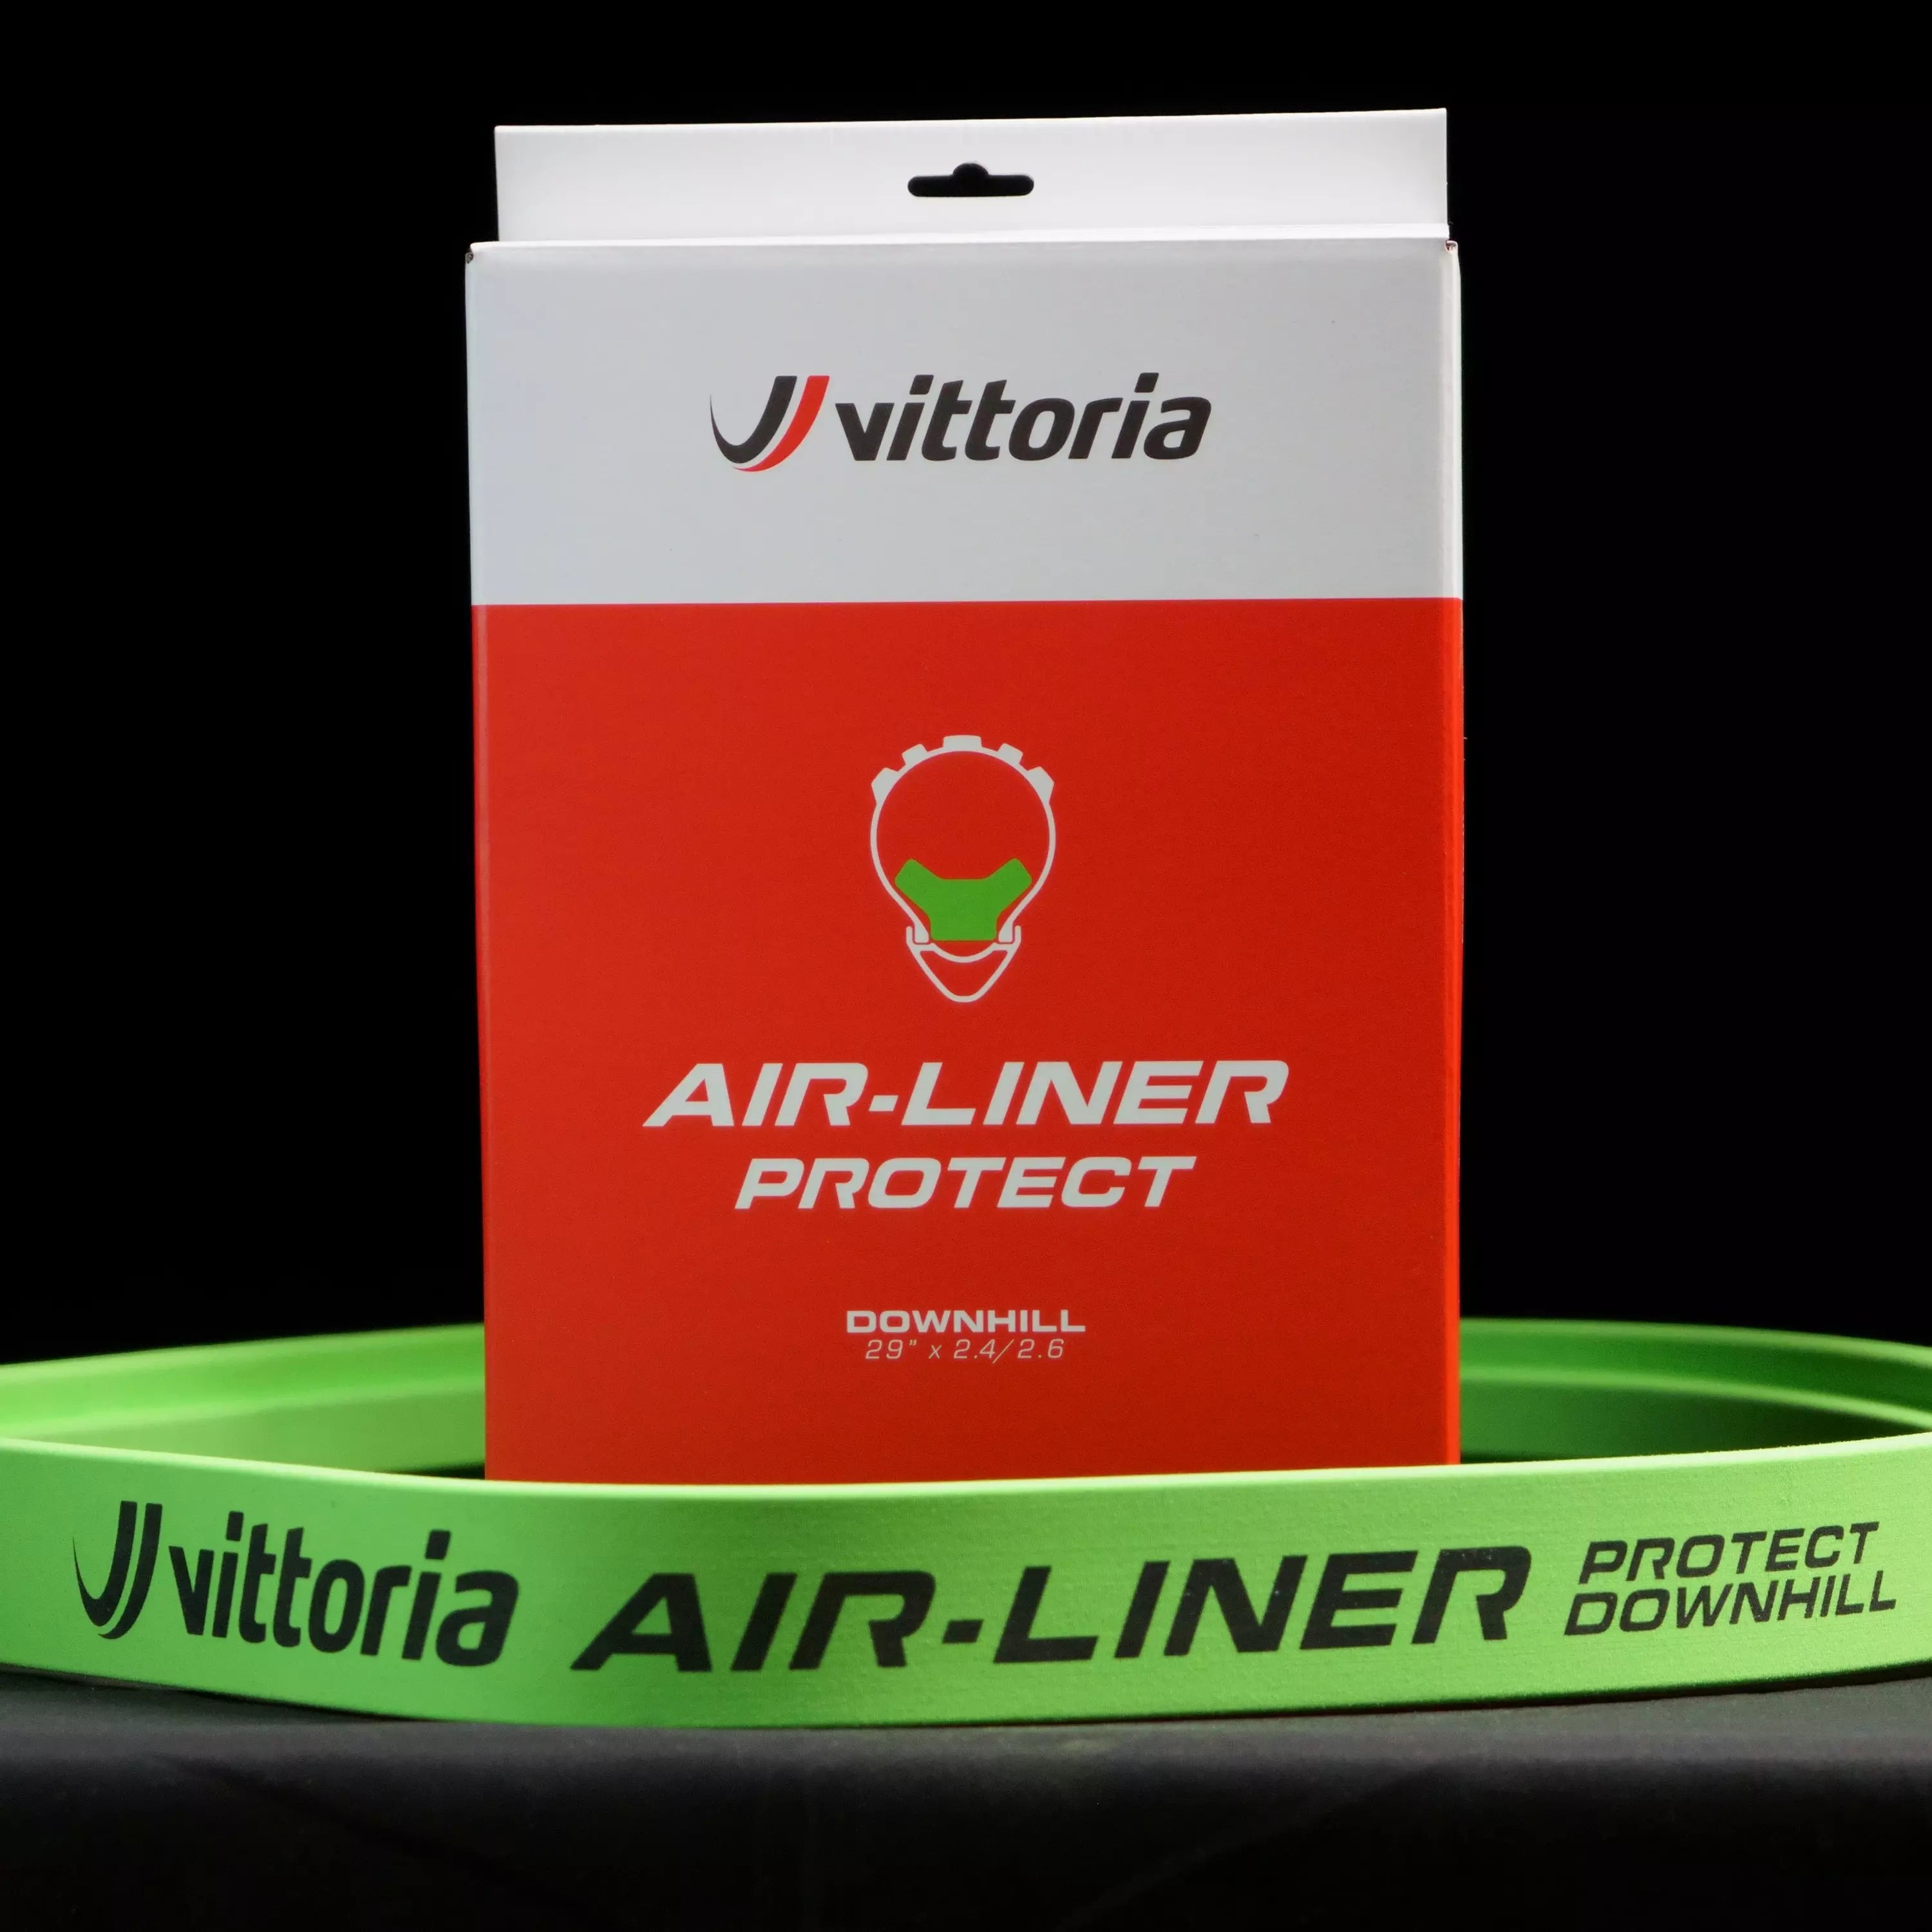 Air-Liner Protect Downhill